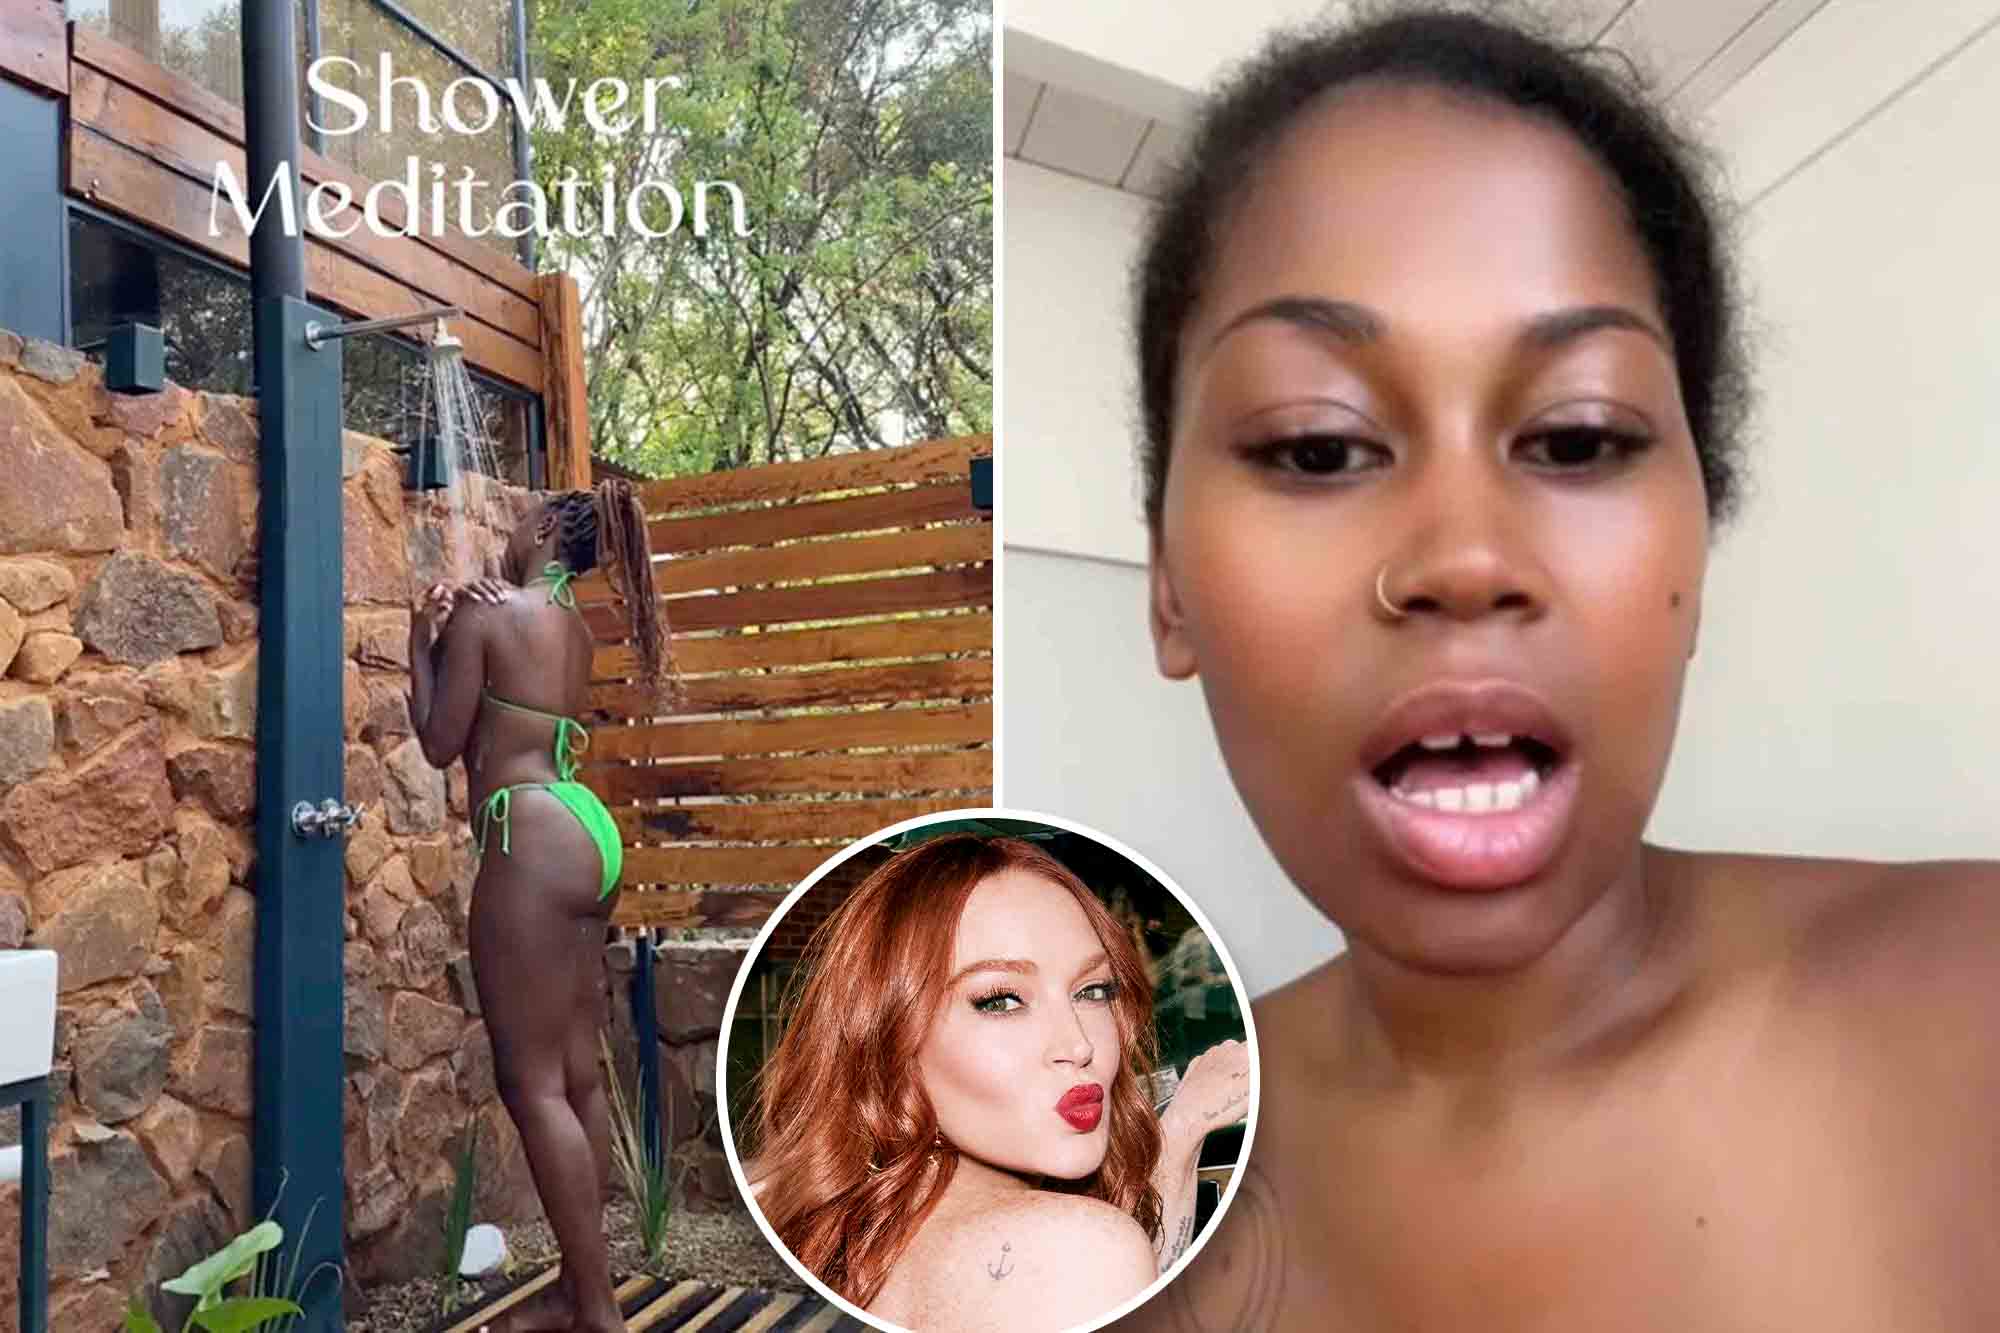 calin popescu recommends lindsay lohan nude shower pic